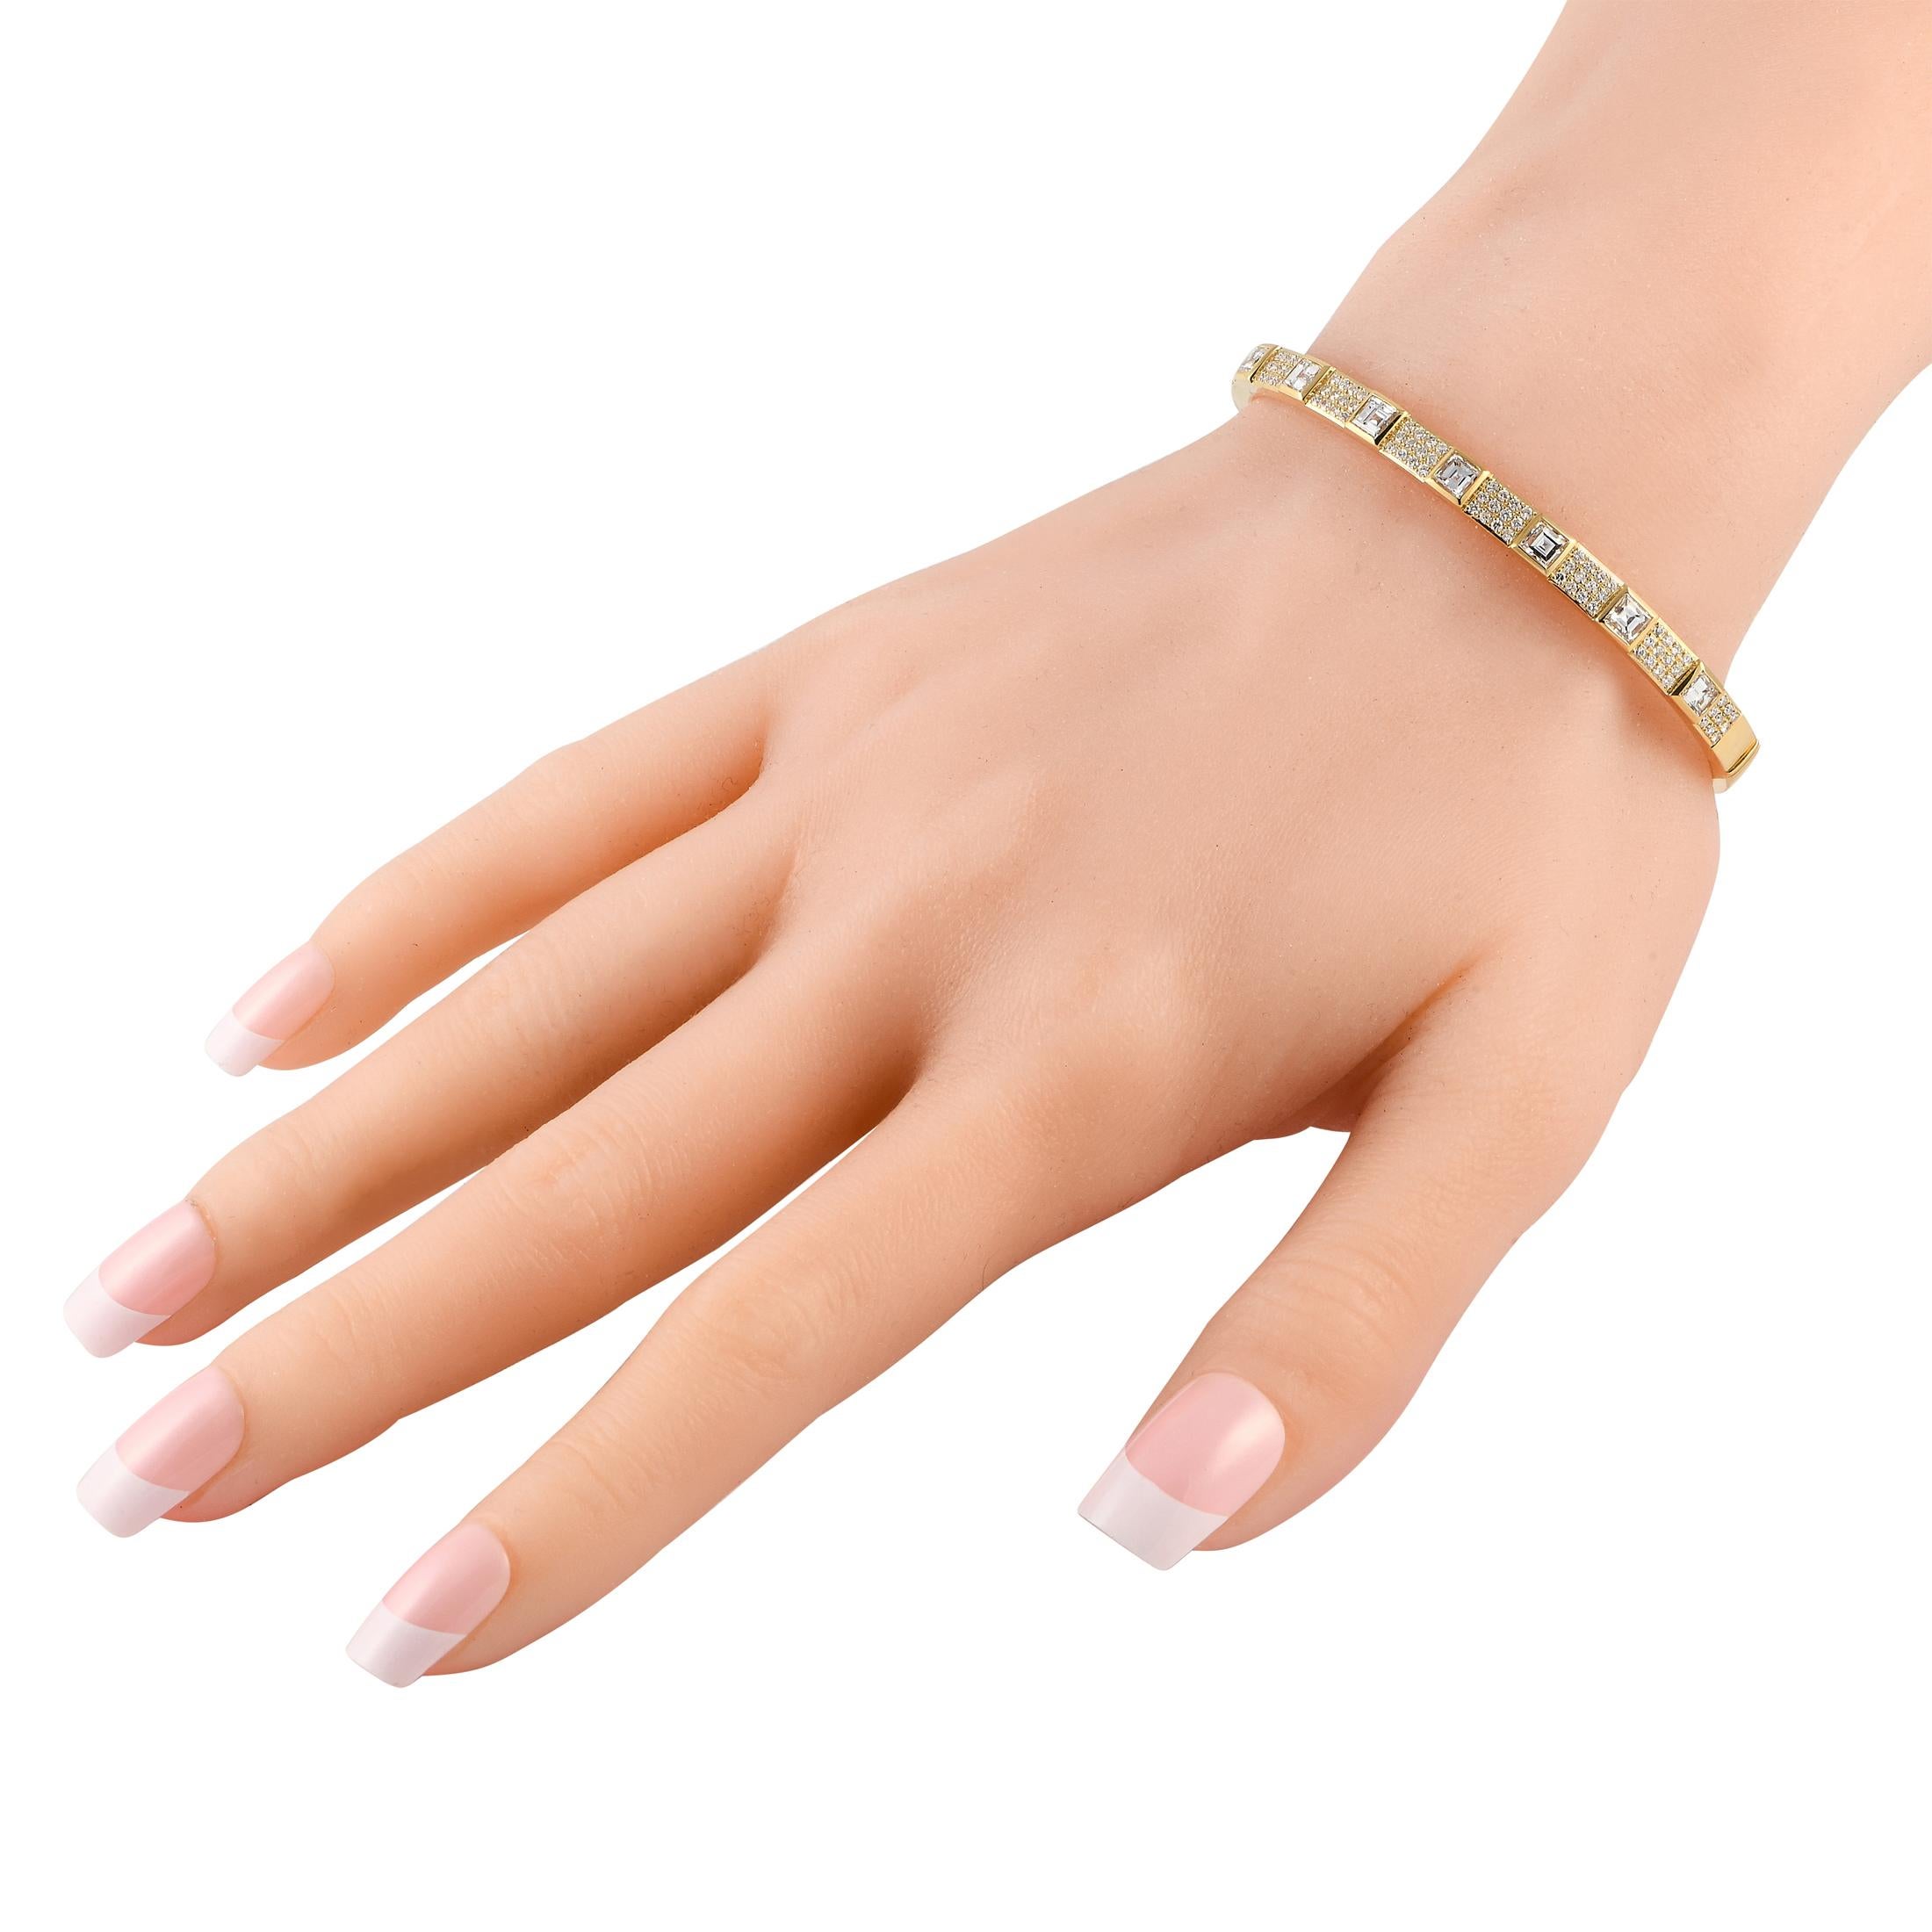 Whether worn with a classic button-down or a formal gown, this diamond bracelet can elevate an outfit. This yellow gold bangle shimmers with a pattern of alternating step-cut diamonds on square bezels and paved diamond clusters. Easy to put on and